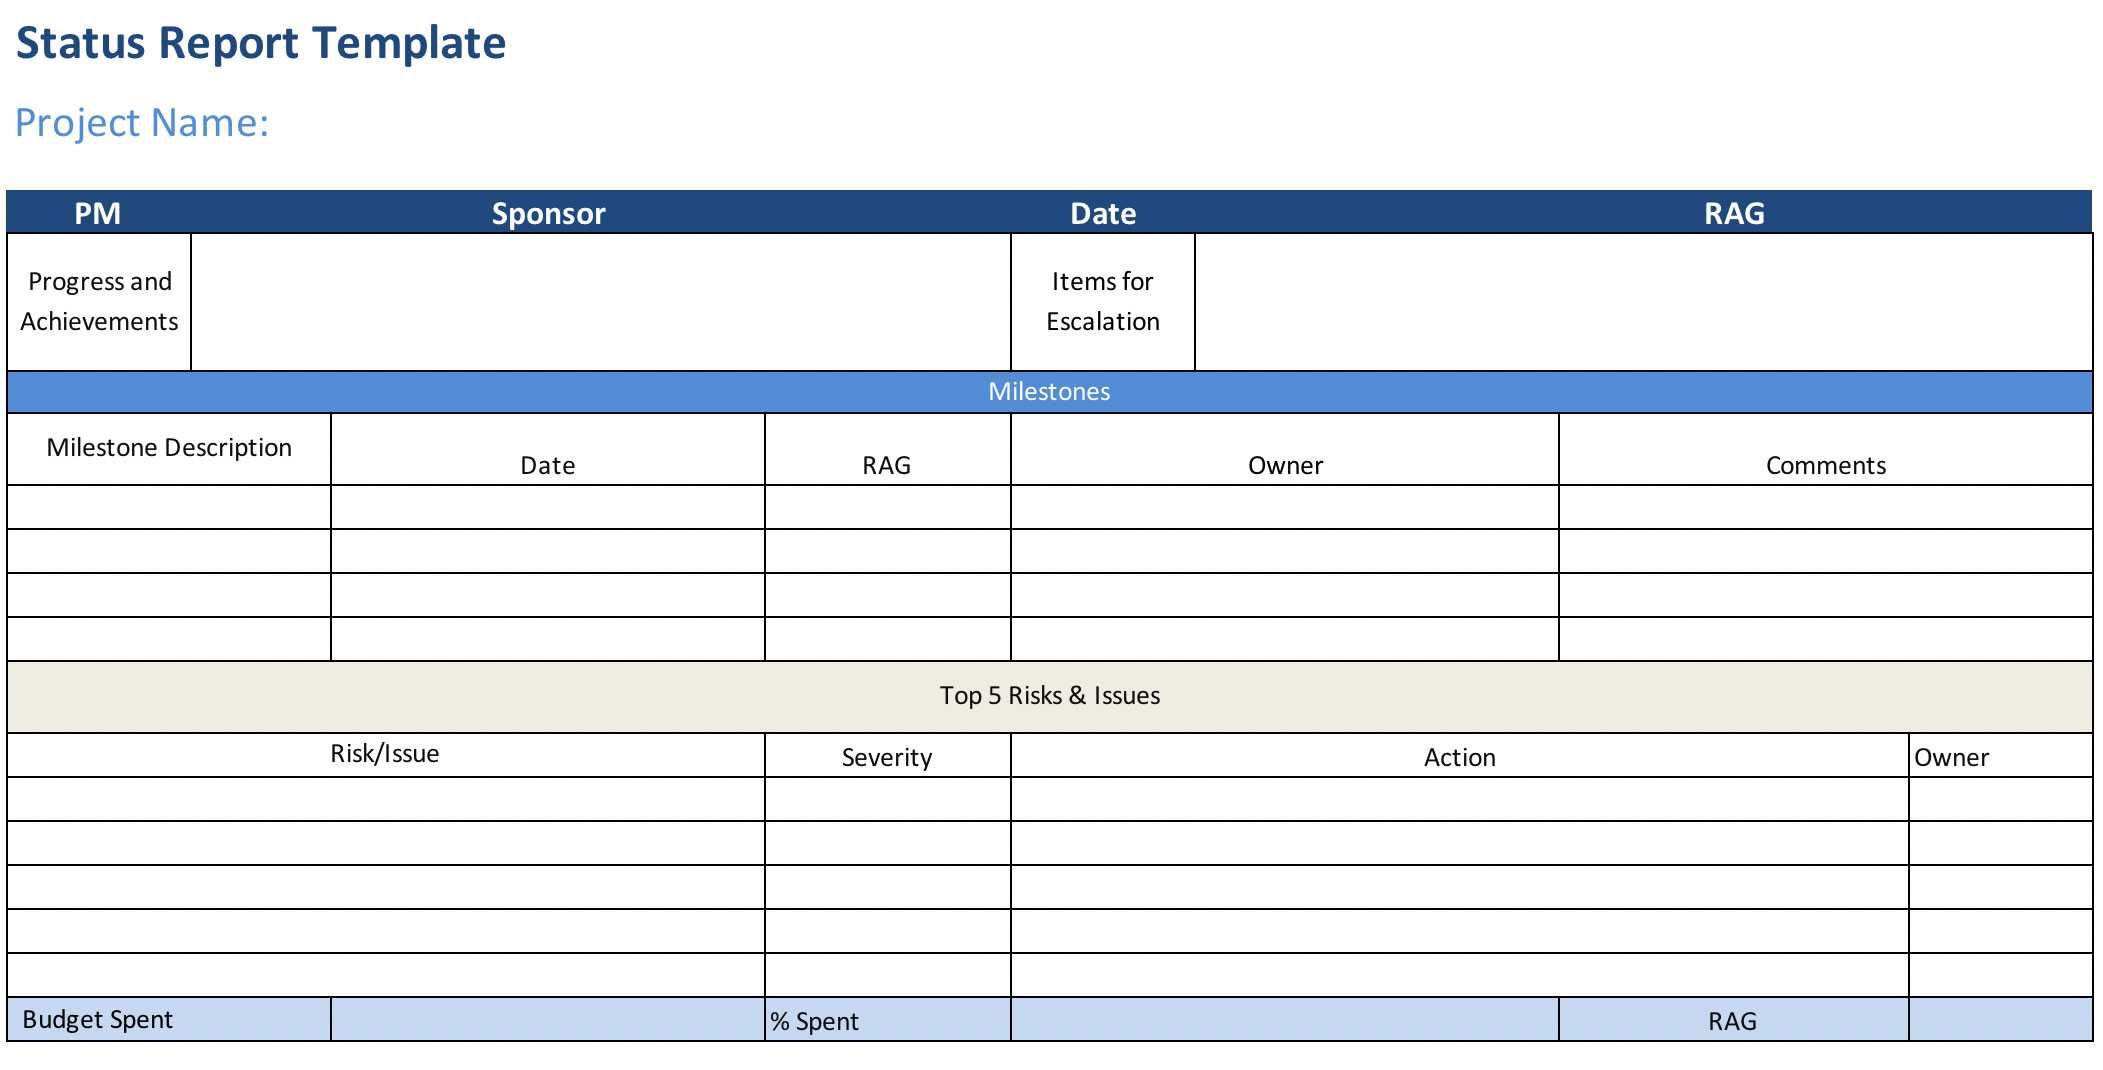 Project Status Report (Free Excel Template) – Projectmanager Throughout Software Development Status Report Template